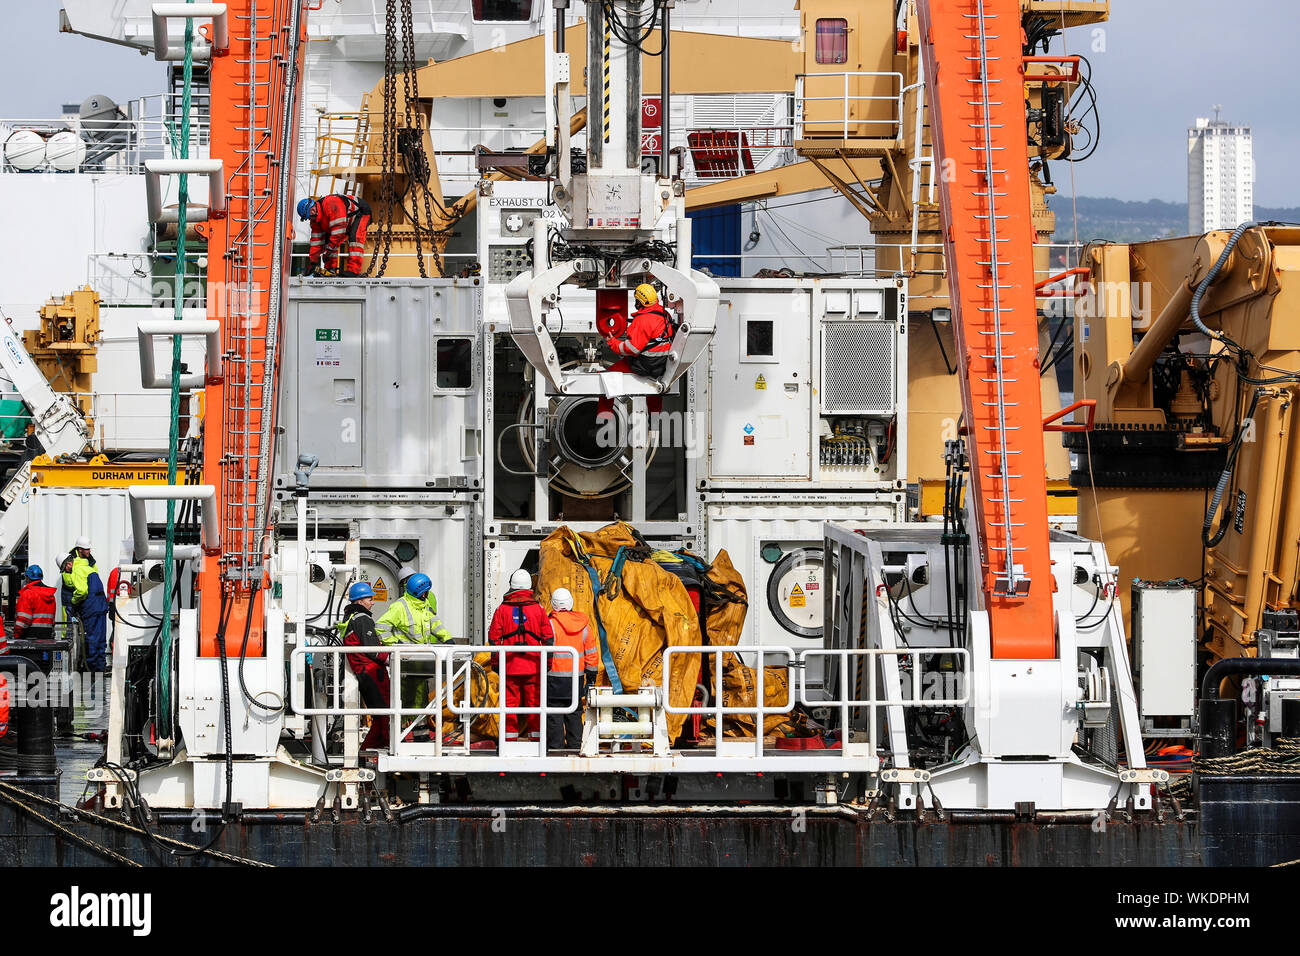 Glasgow, UK. 4th September 2019. The Faslane based NATO Submarine Rescue System (NSRS) was preparing to set sail from Glasgow's King George V Dock to take part in Exercise Golden Arrow on the Firth of Clyde with the teams who operate it the new unique rescue system, jointly owned by UK, France and Norway. The operating teams include Commander CHRIS BALDWIN (Royal Navy) Commander Espin ENGEBRETSEN (Norwegian Navy) and OLIVIA KINGHORN, aged 26, Project Engineer who supervised as the submersible, capable of diving down to 610 metres. Credit: Findlay/Alamy Live News Stock Photo